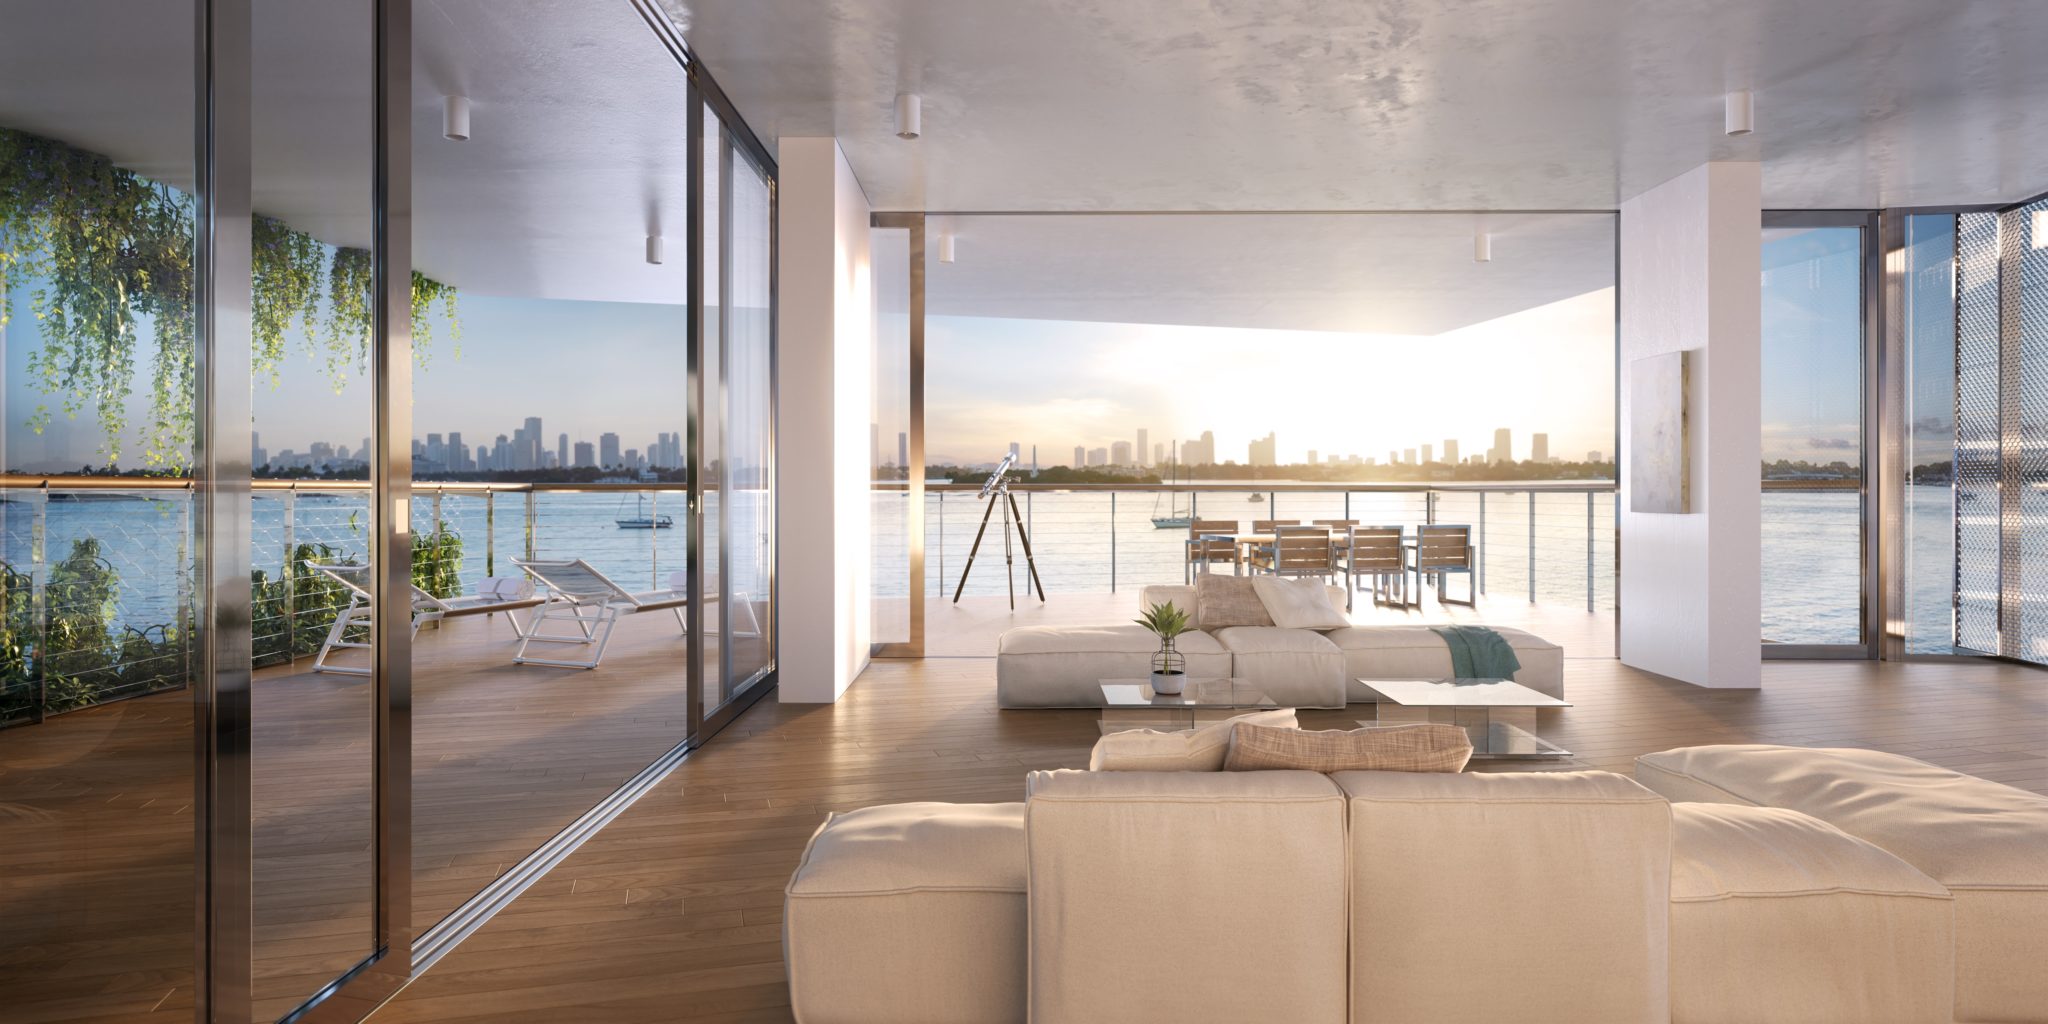 Take a look at Jean Nouvel’s Monad Terrace in South Beach